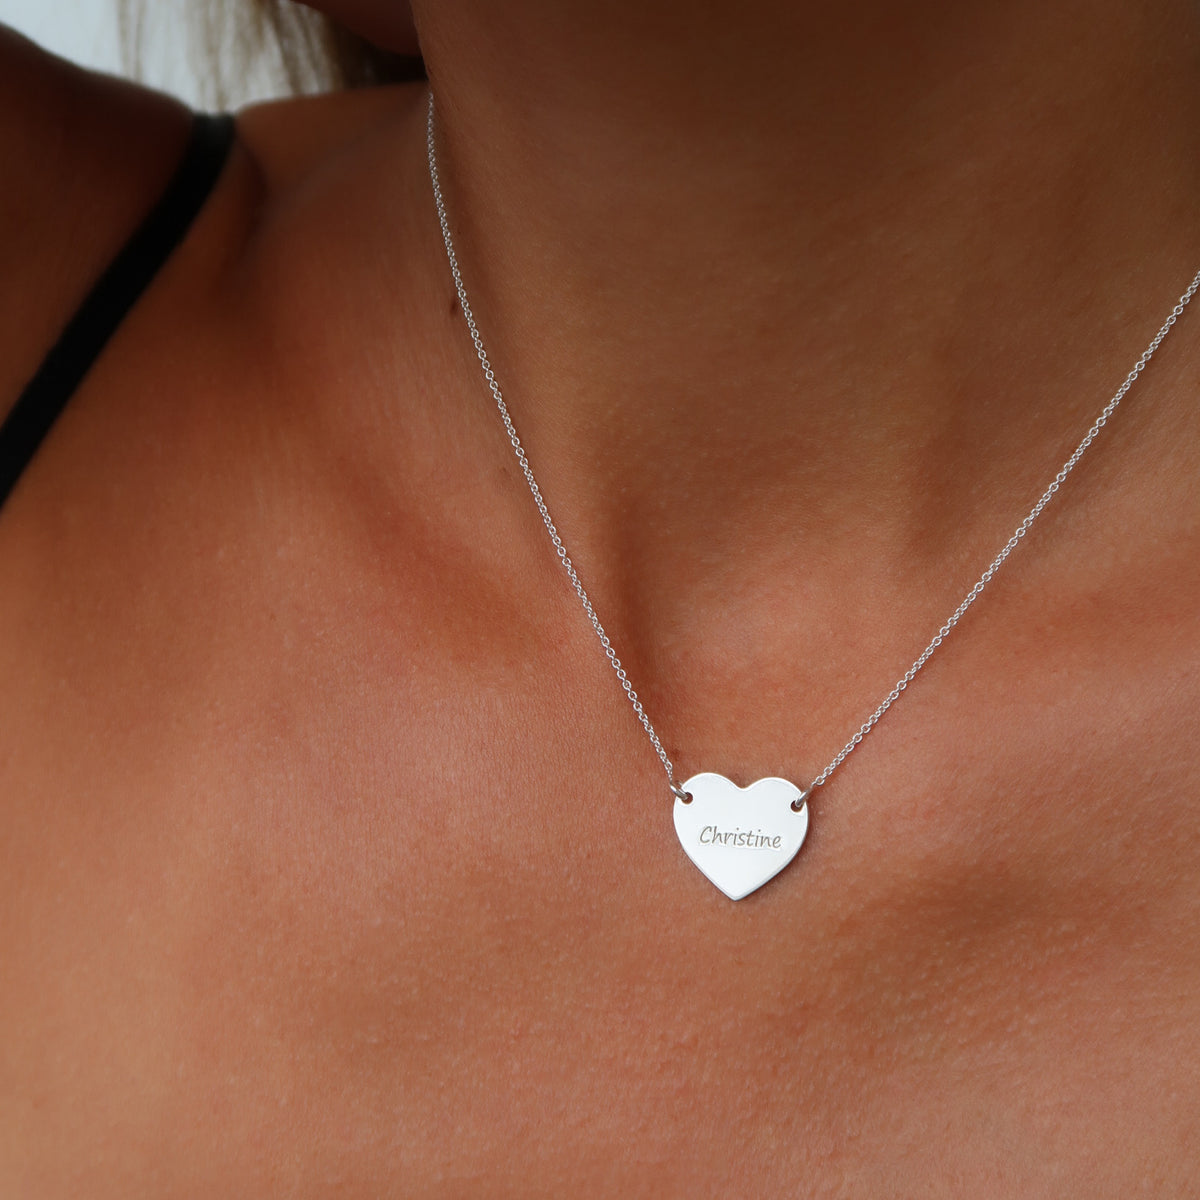 Personalized Heart Pendant Necklace - Engraved Custom Silver Necklace